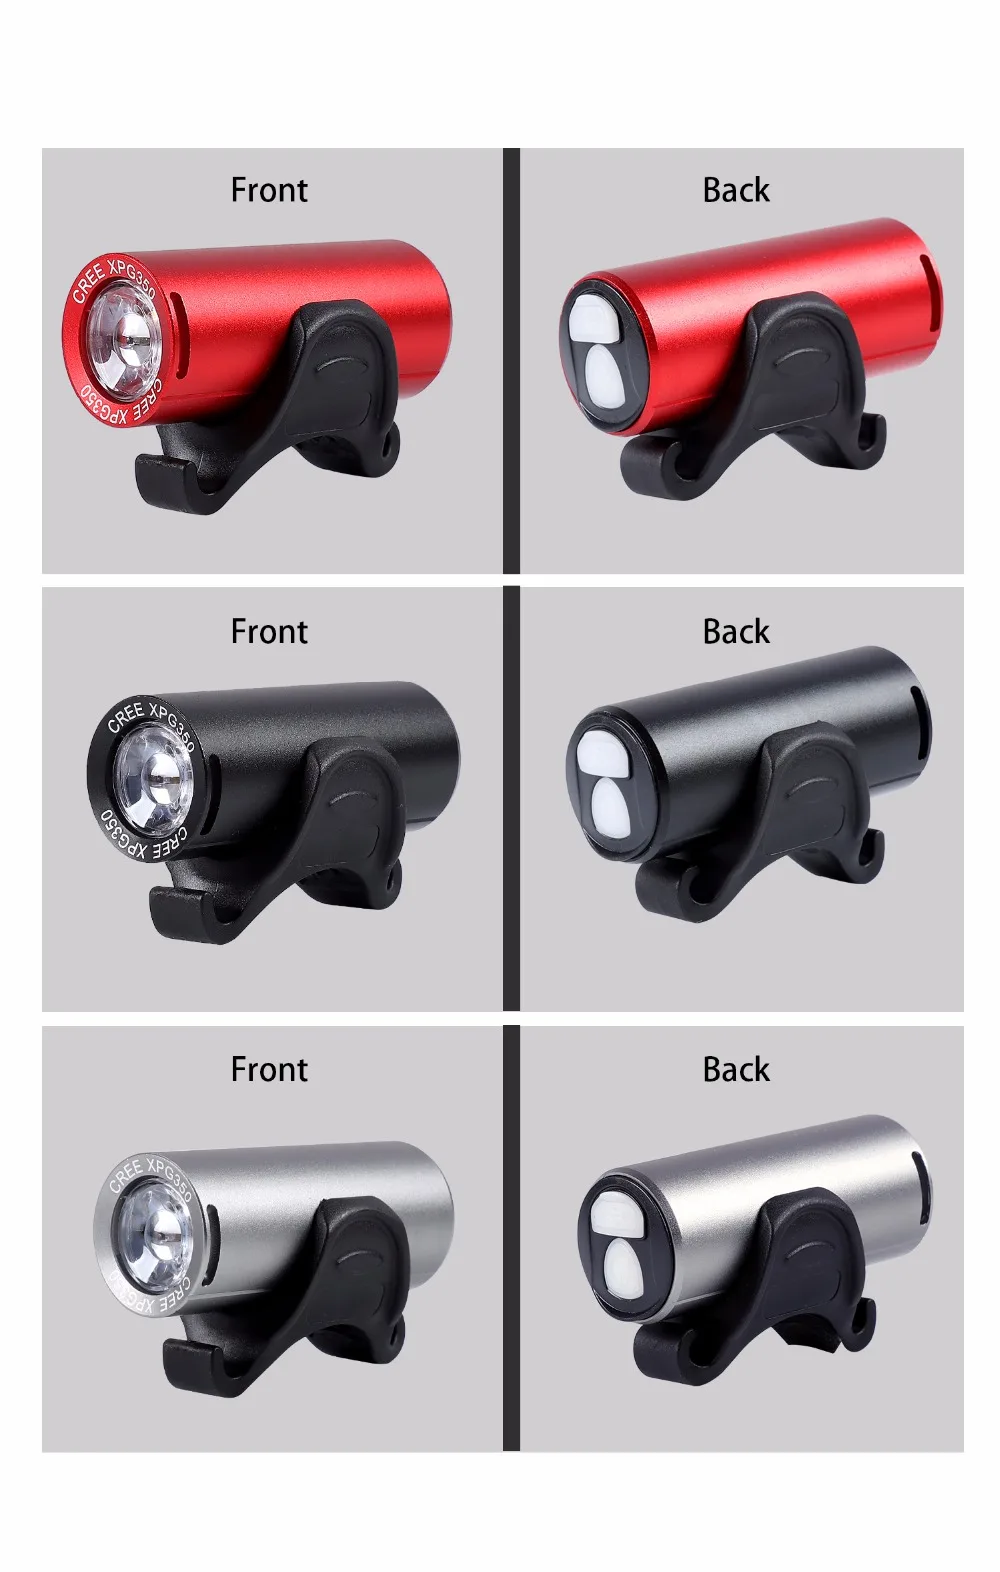 Top WEST BIKING Bike Front Lights LED Safety Taillight Set USB Rechargeable Headlight Rear Light For Bicycle Cycling Flashlight 9